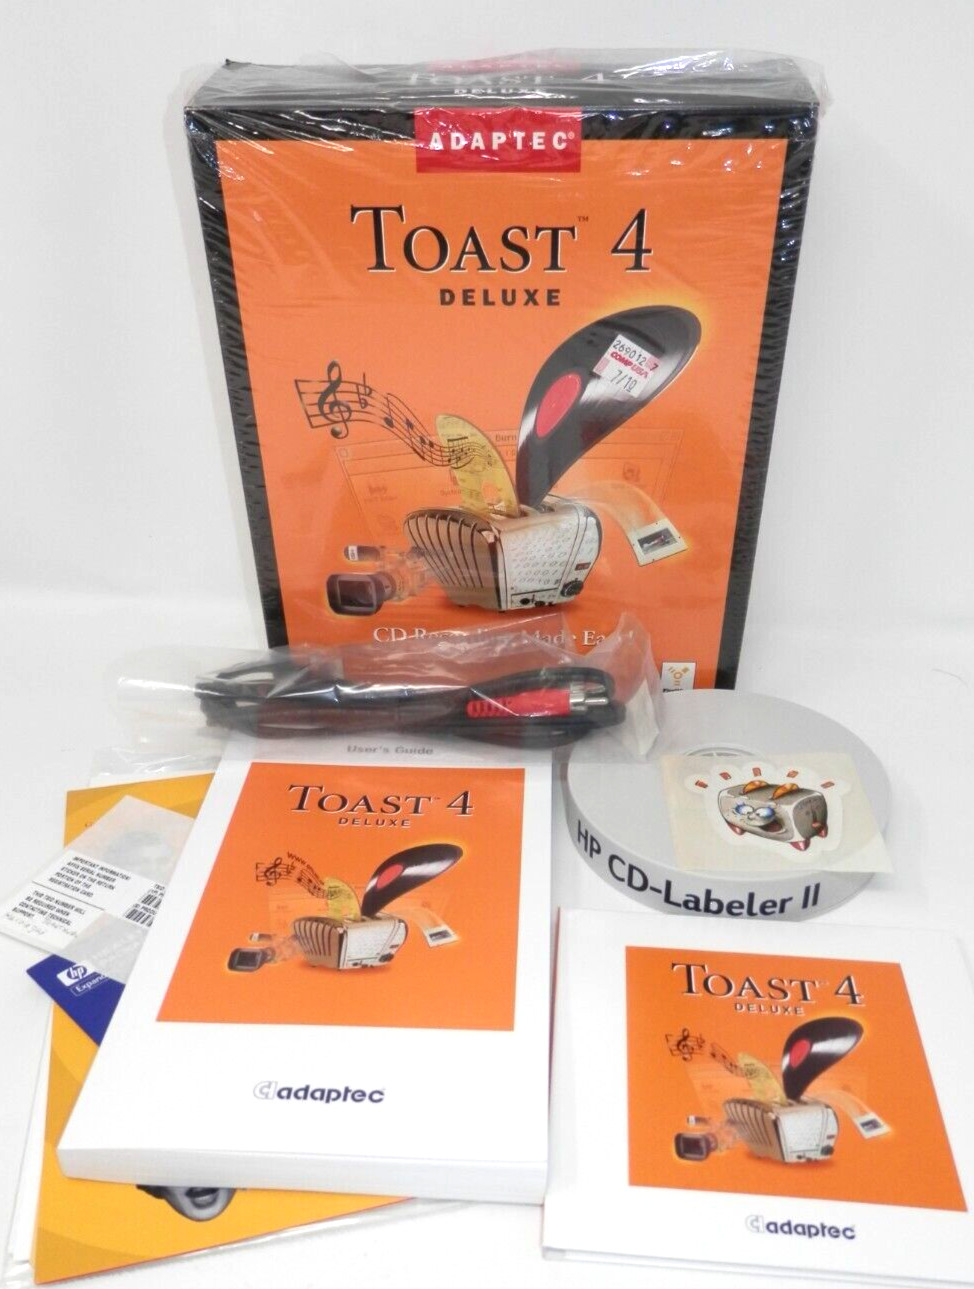 Adaptec Toast 4 Deluxe Software for Mac w/HP CD Labeler Record Big Box Complete